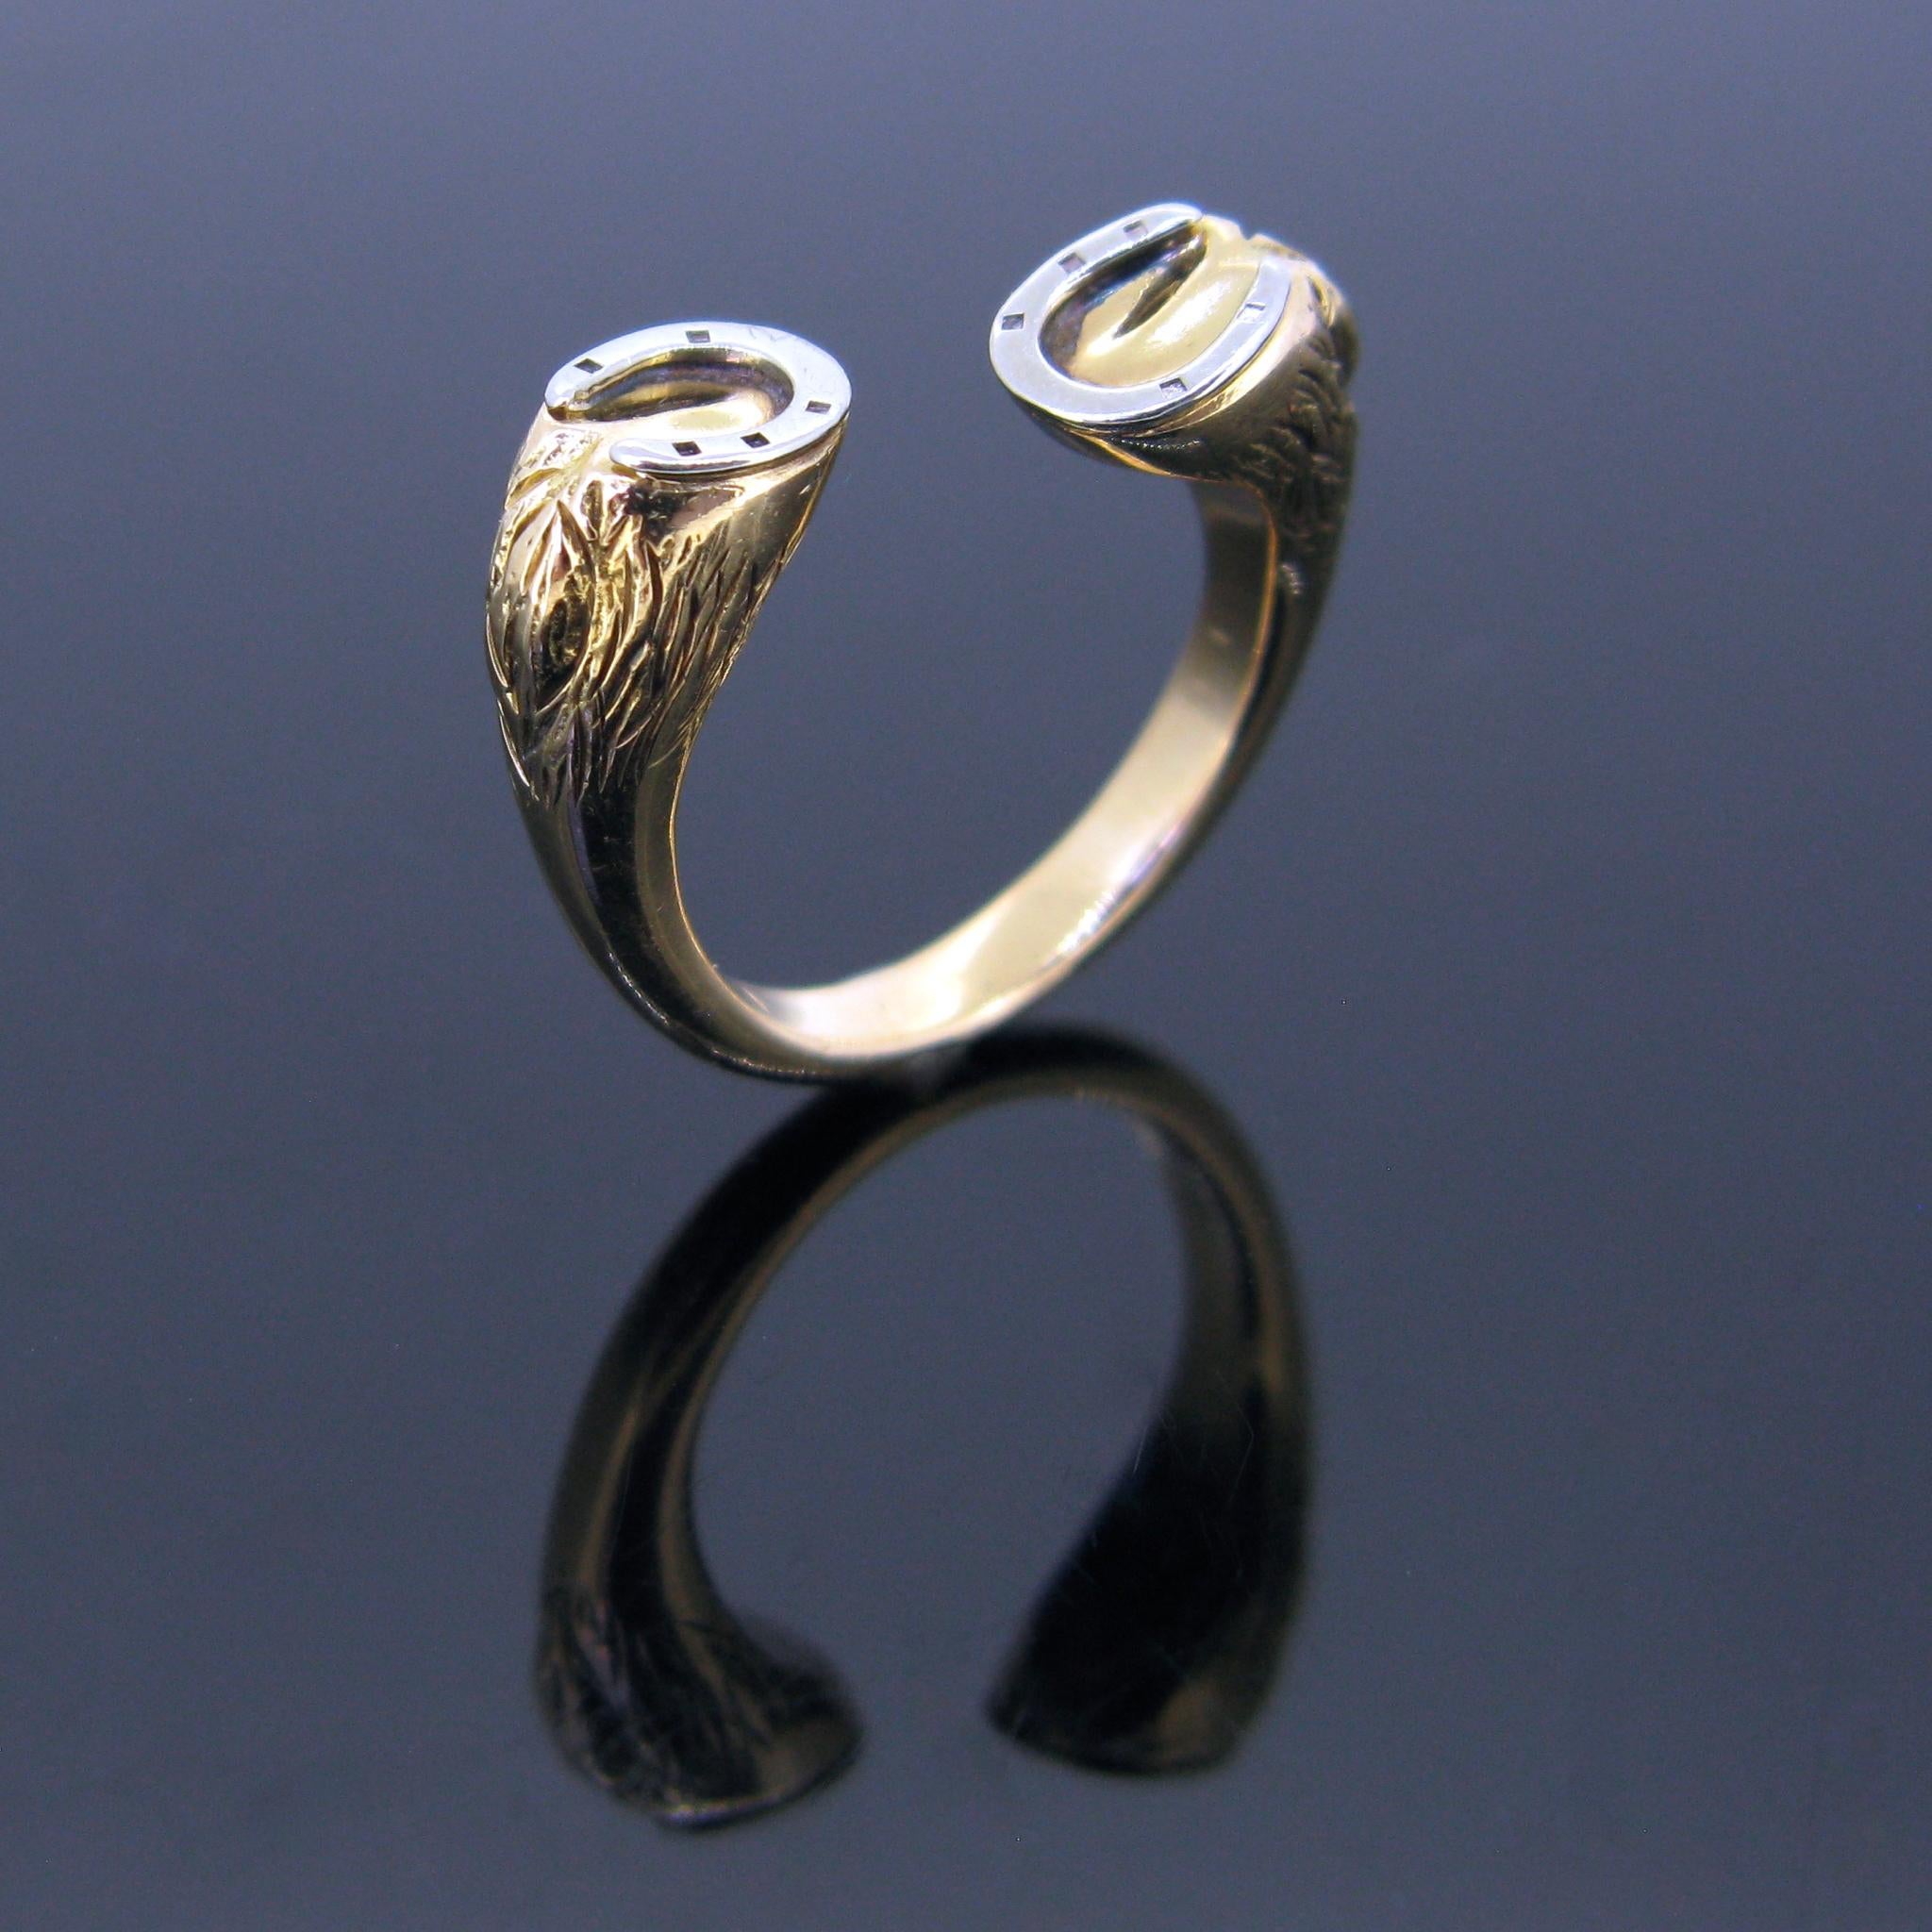 A vintage 18kt gold ring by GUCCI. This one has an original and a funny design. It features 2 horses’ hooves. The ring is made in 18kt yellow and white gold. It was perfectly handcrafted and it is quite realistic. The ring is signed Gucci on the